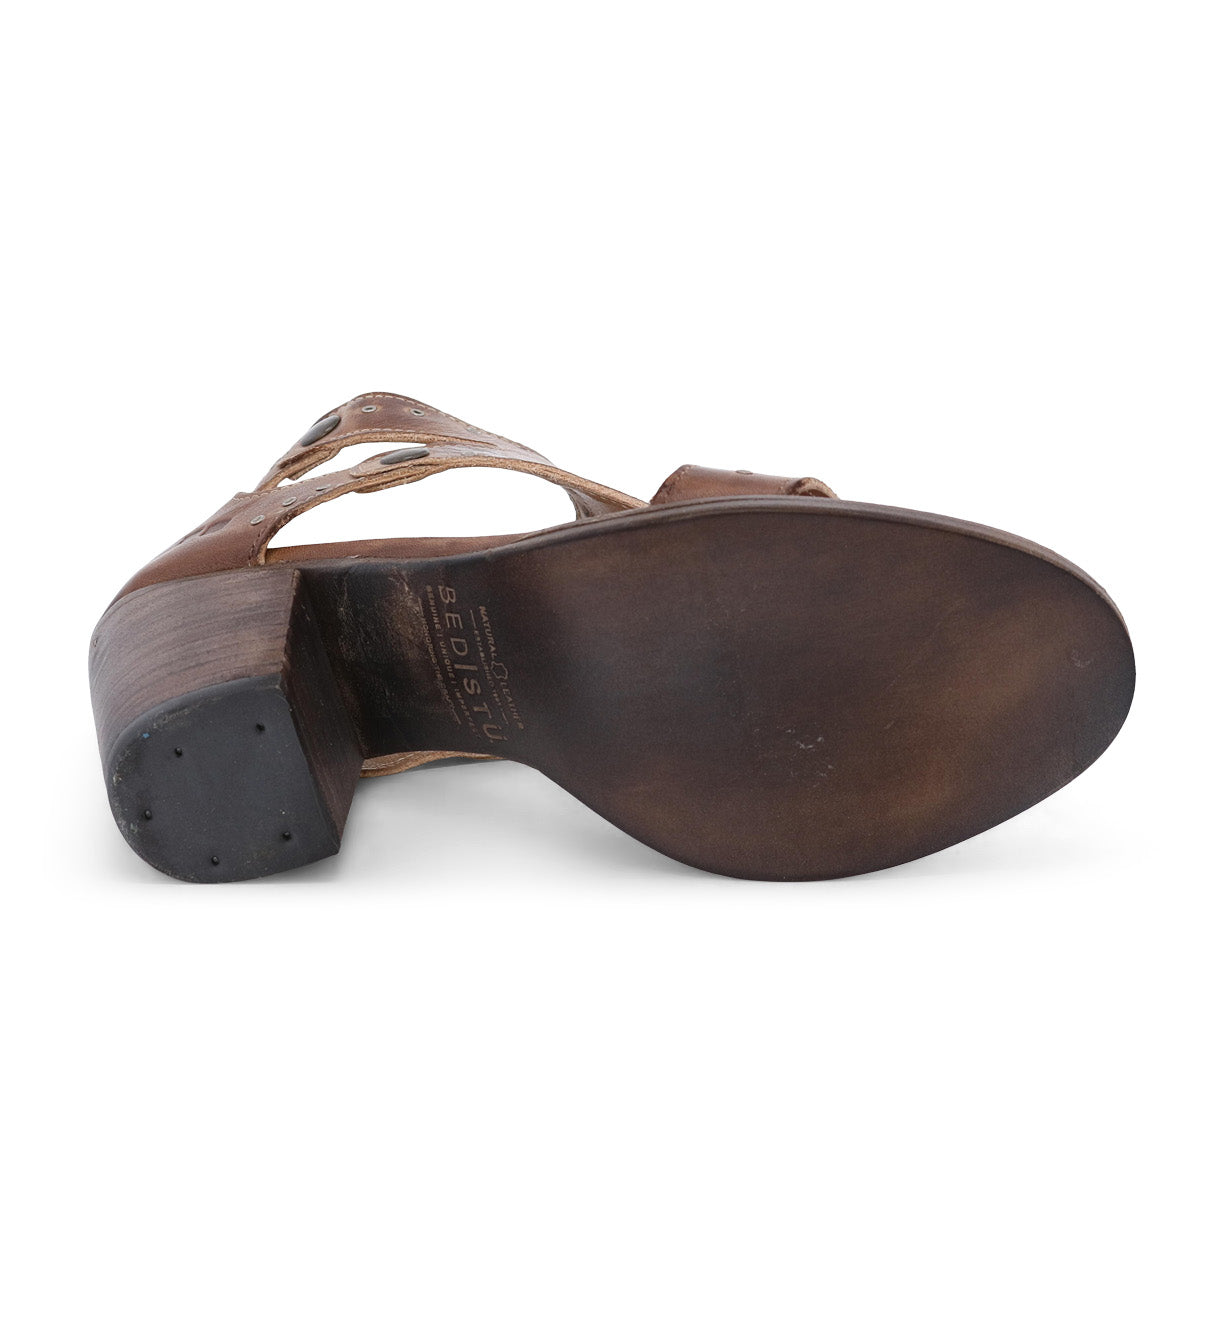 A women's brown leather Sona shoe with a buckle on the side by Bed Stu.